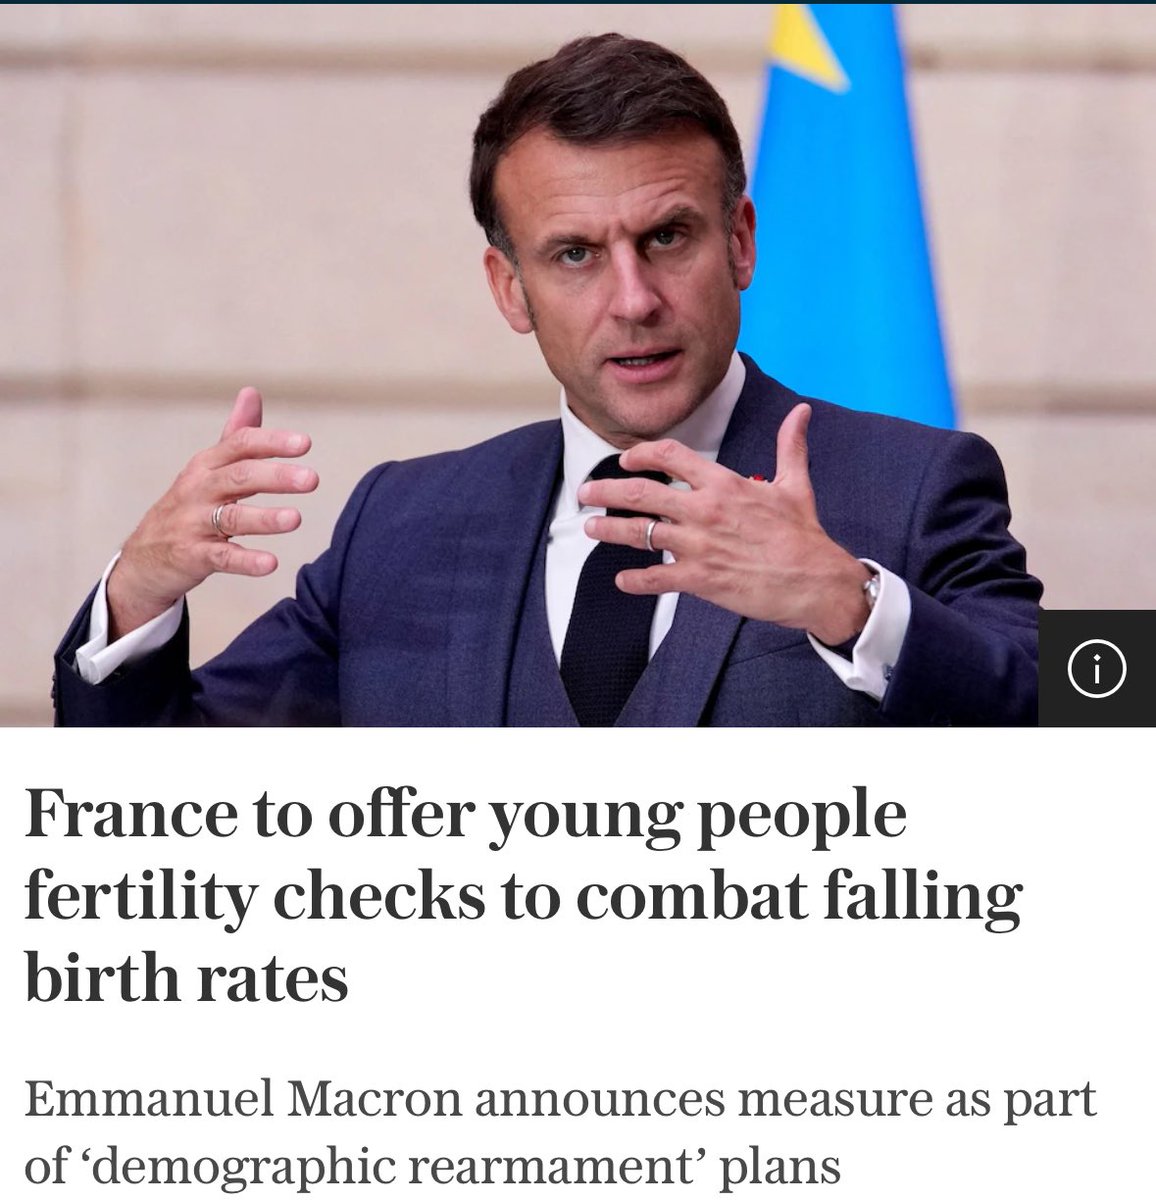 emmanuel macron is the first childless president of the fifth republic.